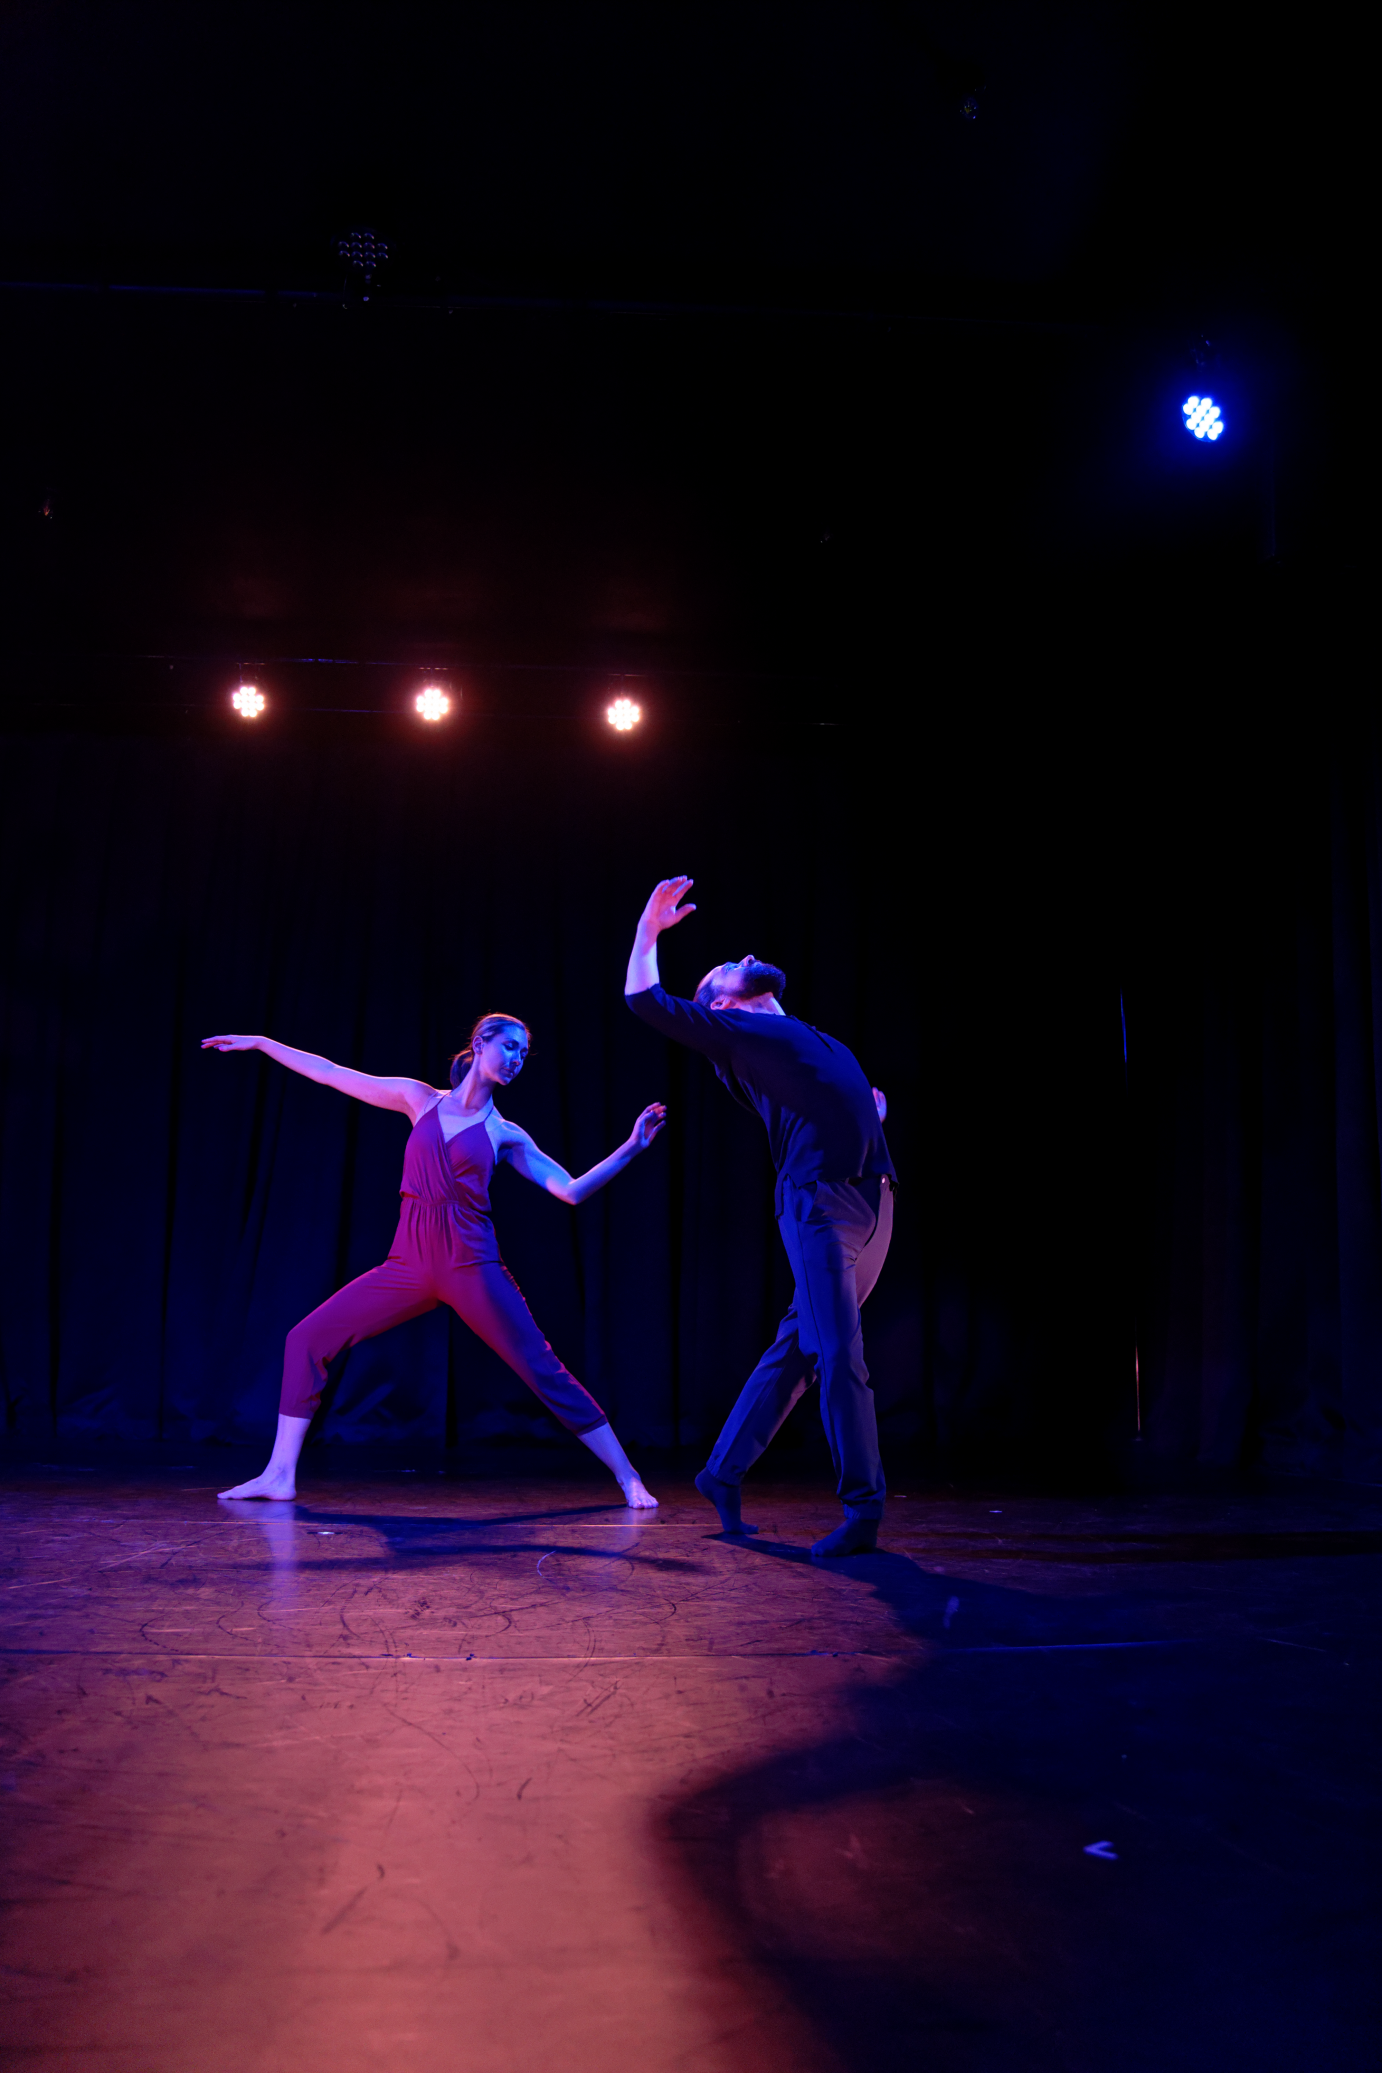 In a red unitard, Siobhan Murray lunges in fourth position. She lifts one arm to Aaron Selissen, who is backbending over her hand. One of his arms is curved and lifted.